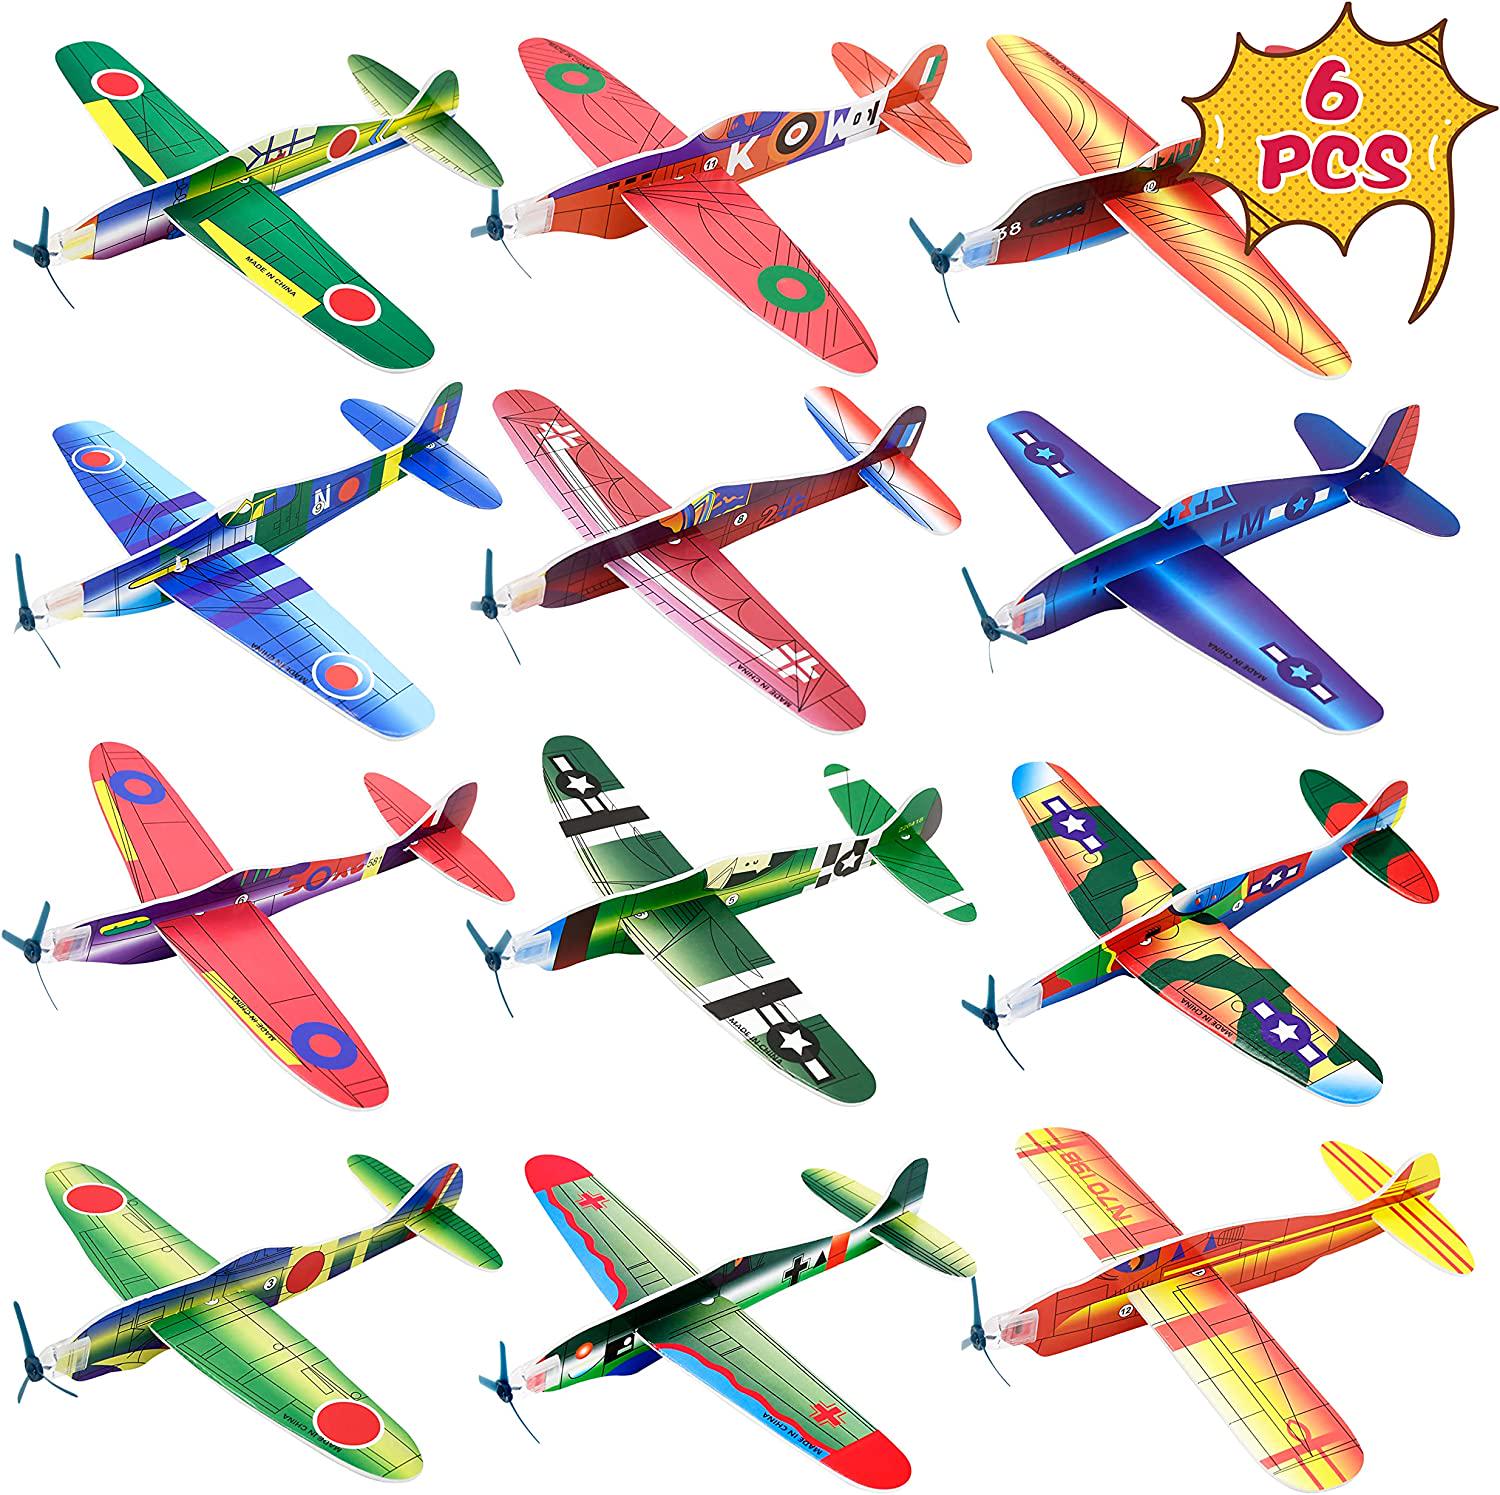 Kissdream, Kissdream 6 Pack 8 Inch Glider Planes - Birthday Party Favor Plane, Great Prize, Handout / Giveaway Glider, Flying Models.(Random Style)